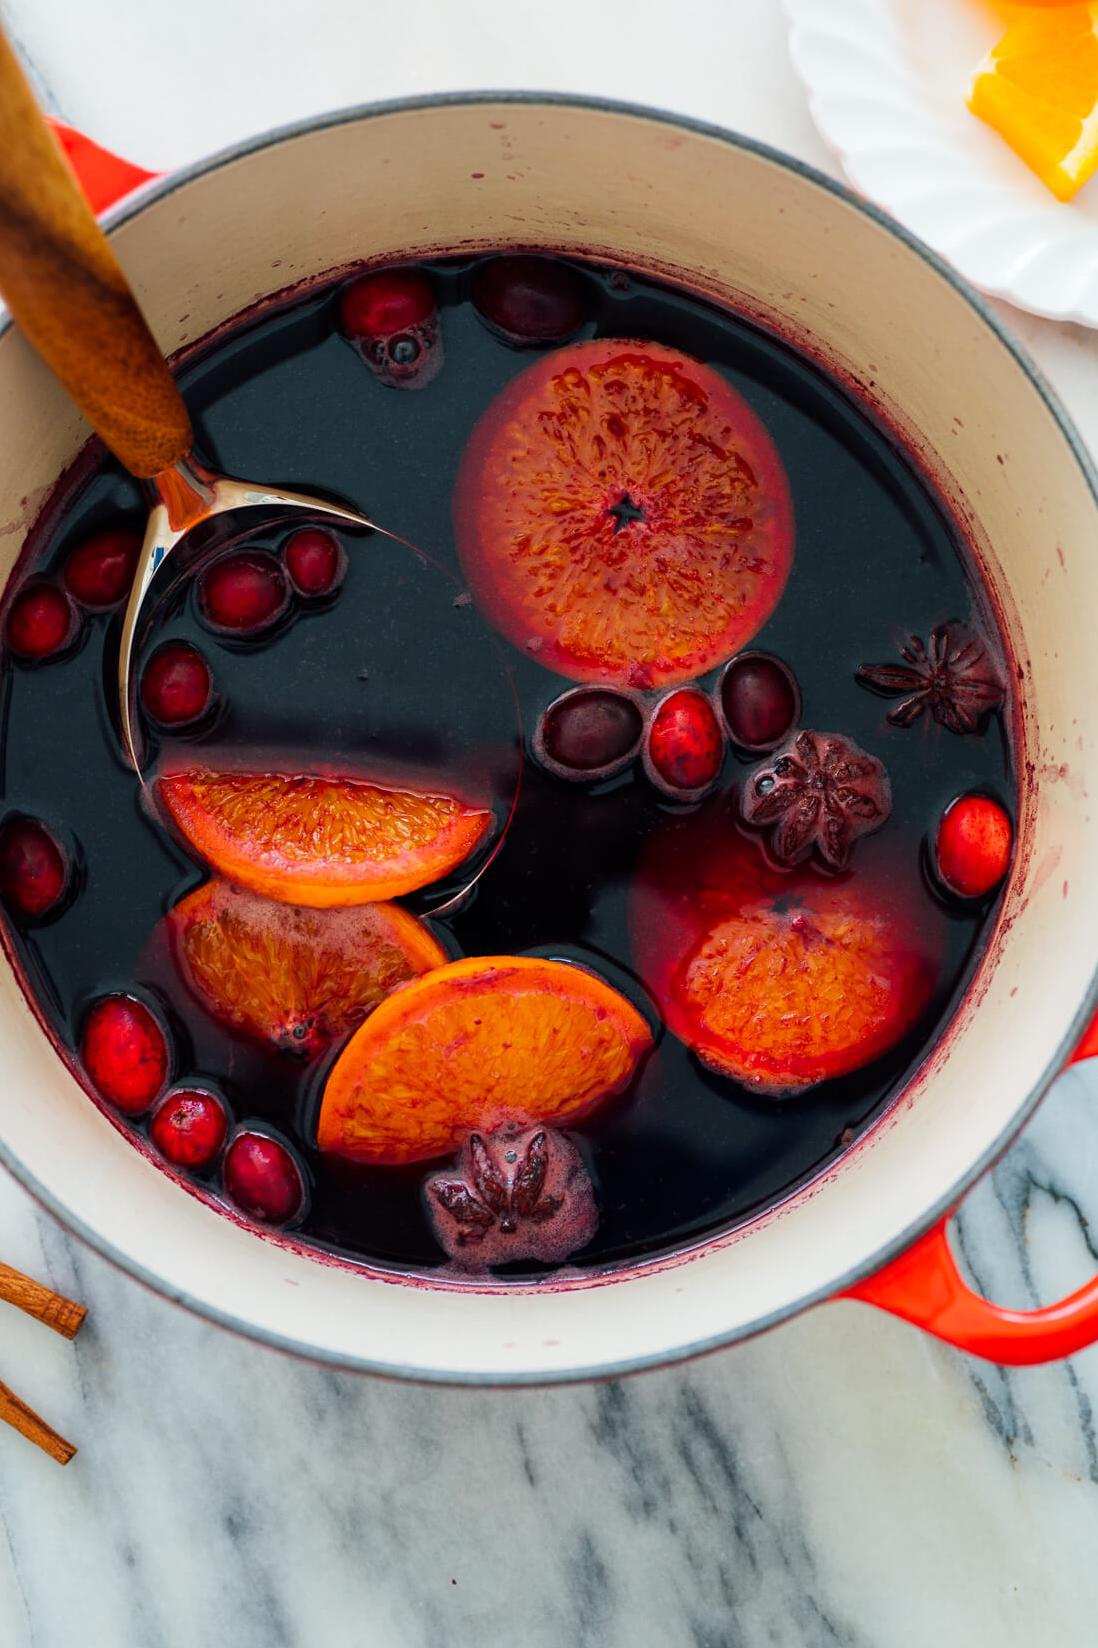  This spiced wine recipe is an excellent alternative to traditional mulled wine.